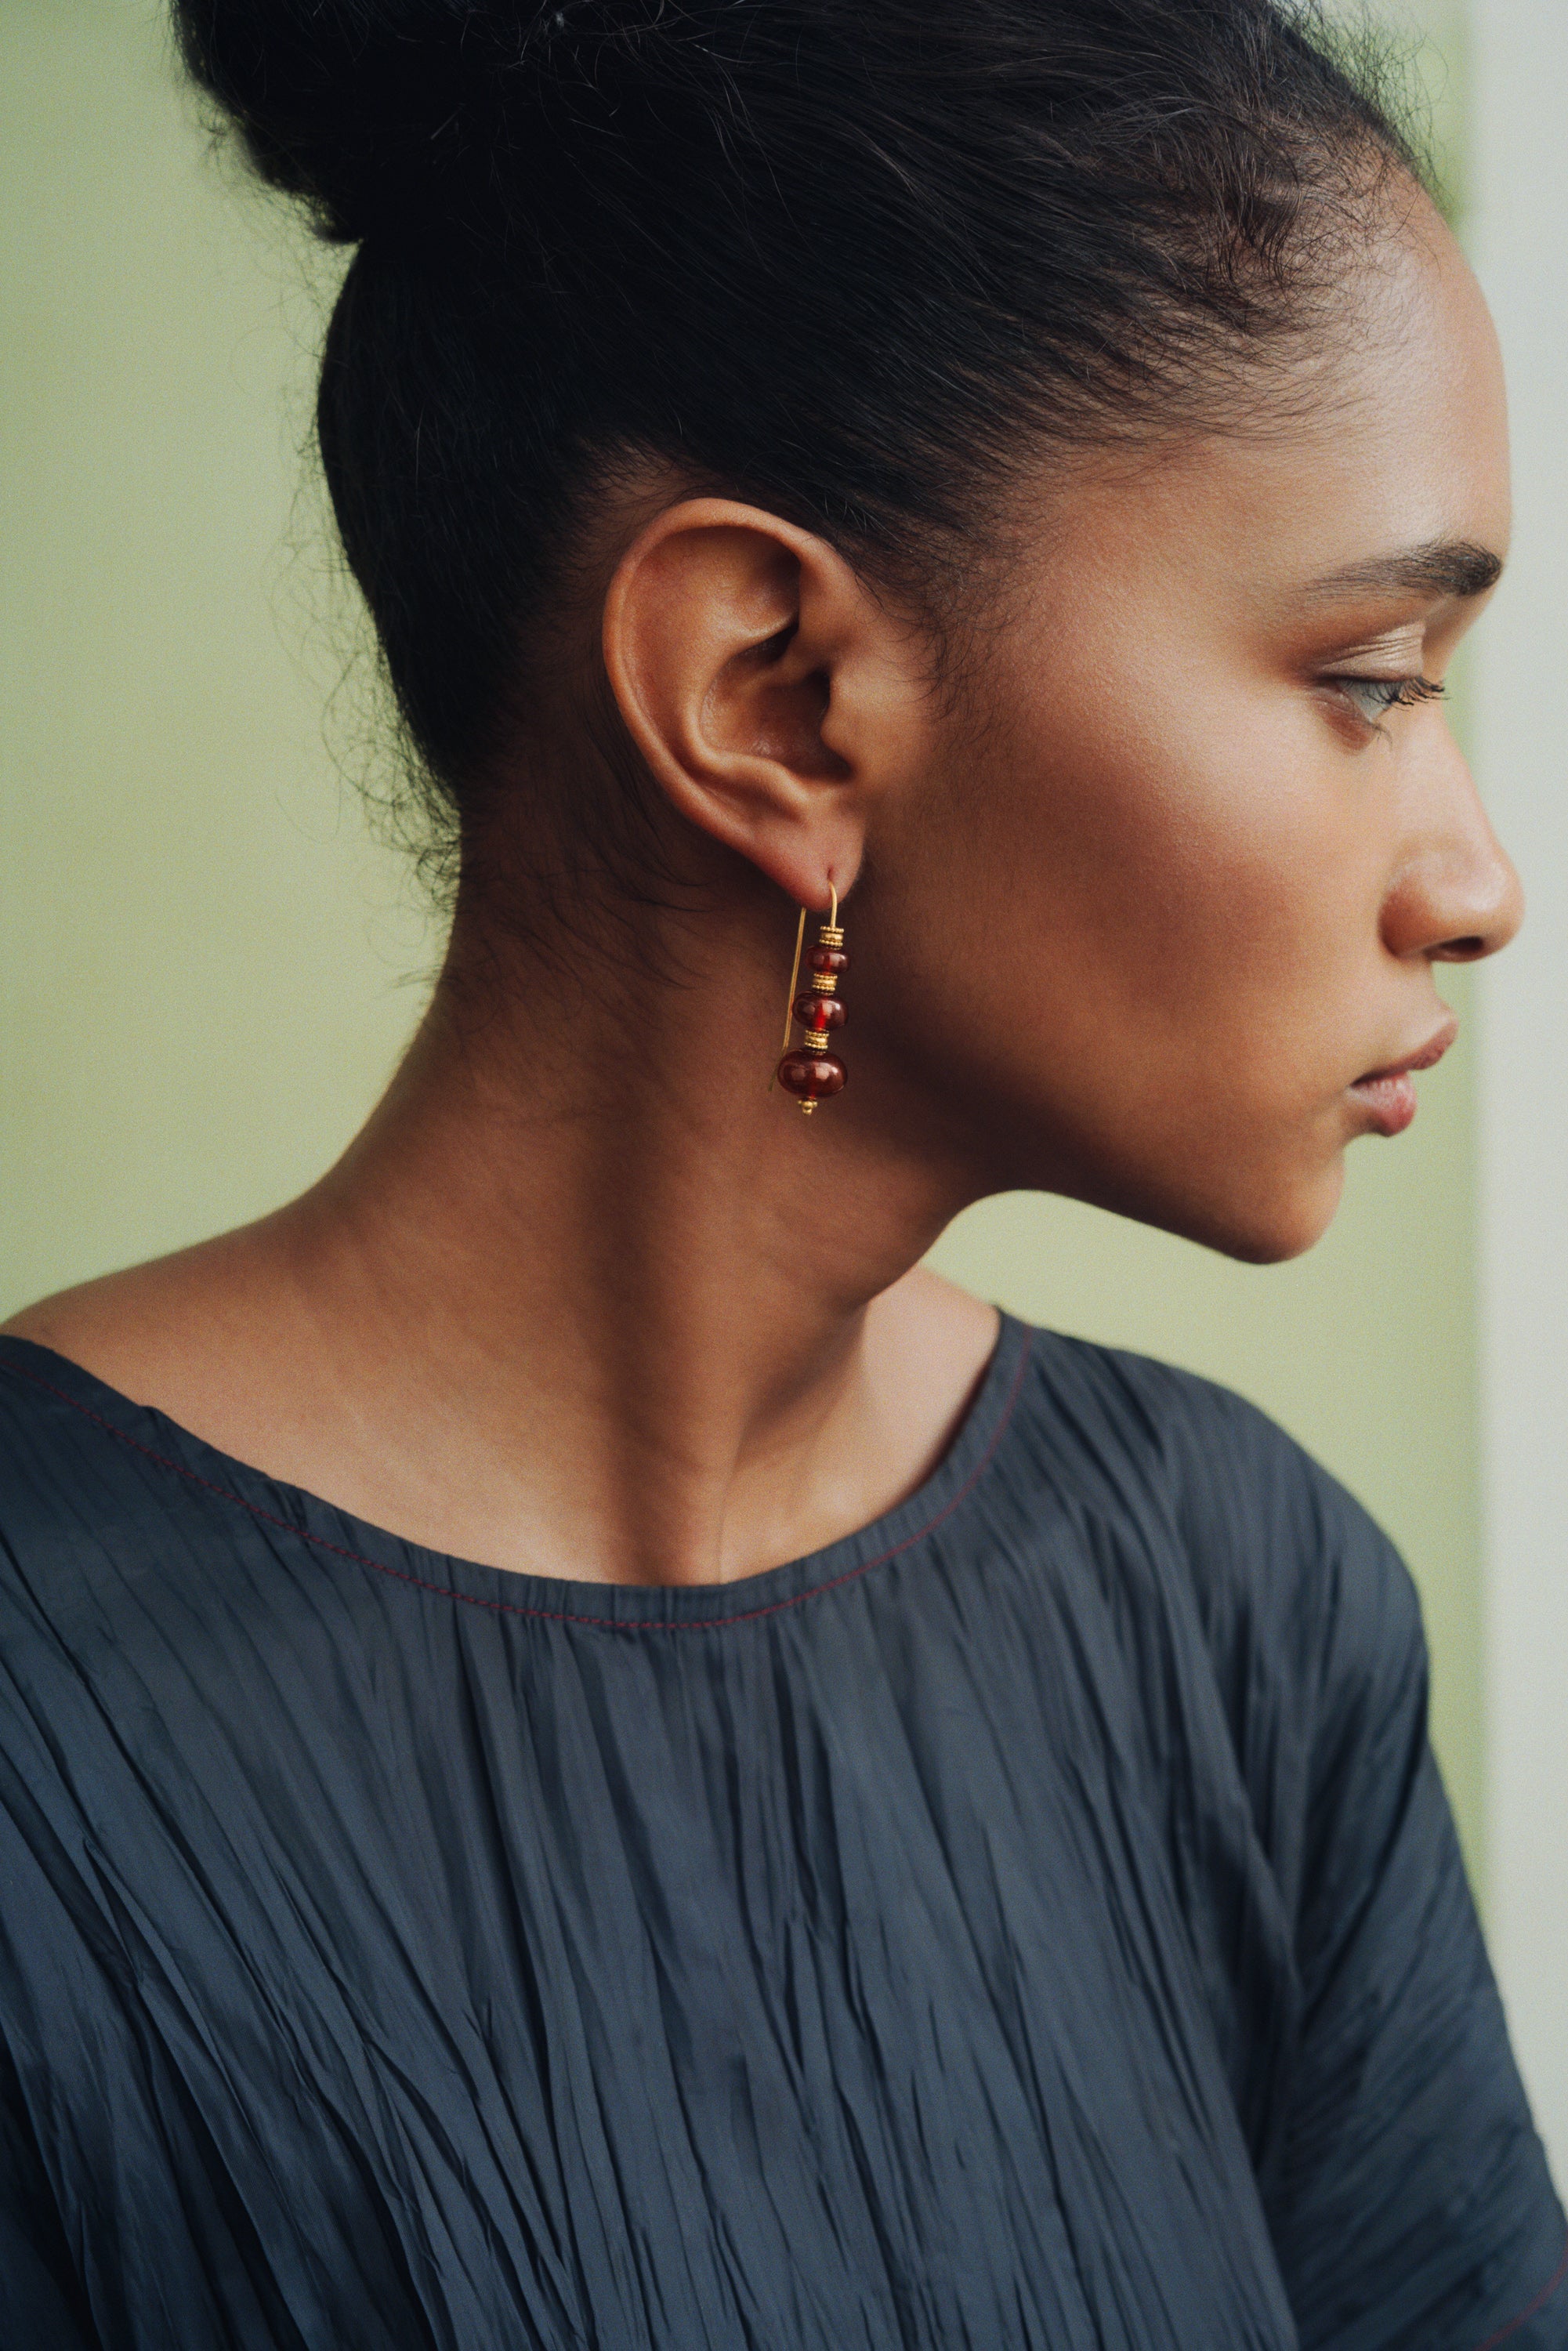 Eclectic Earrings and Ear Cuff